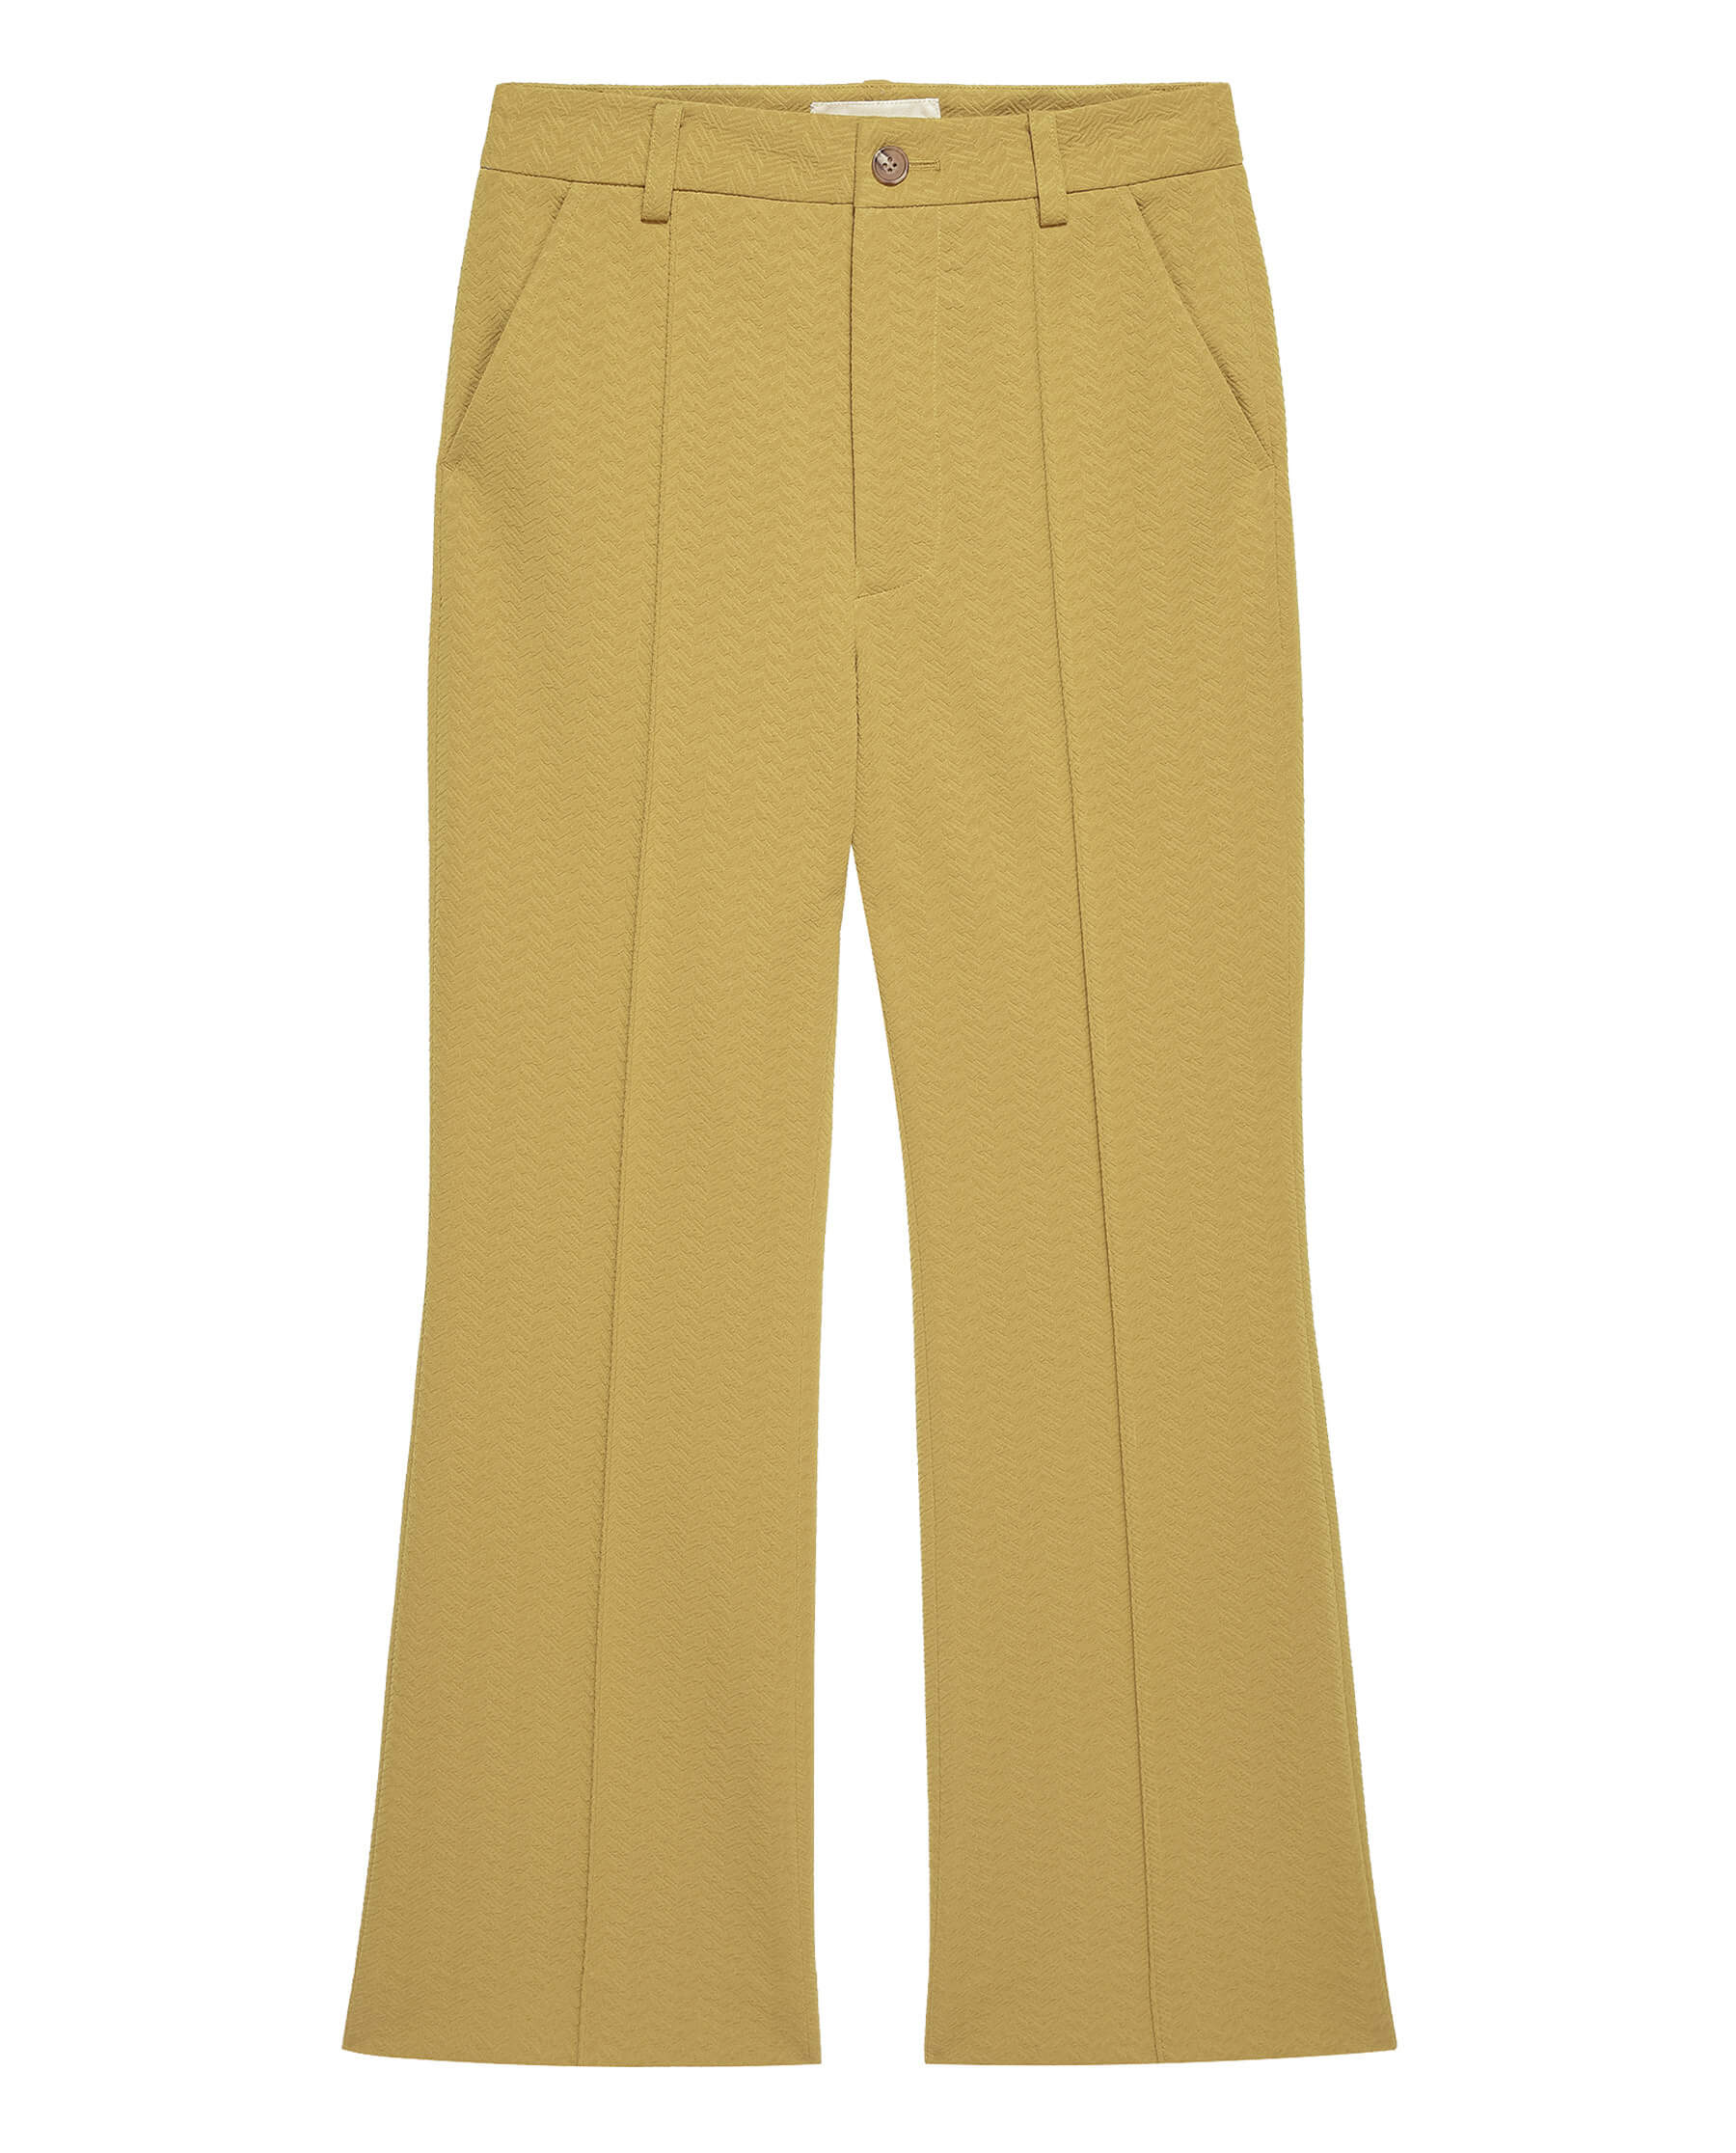 The Geo Jacquard Prim Trouser. -- Gold Leaf TWILL BOTTOM THE GREAT. HOL 23 D1 SALE